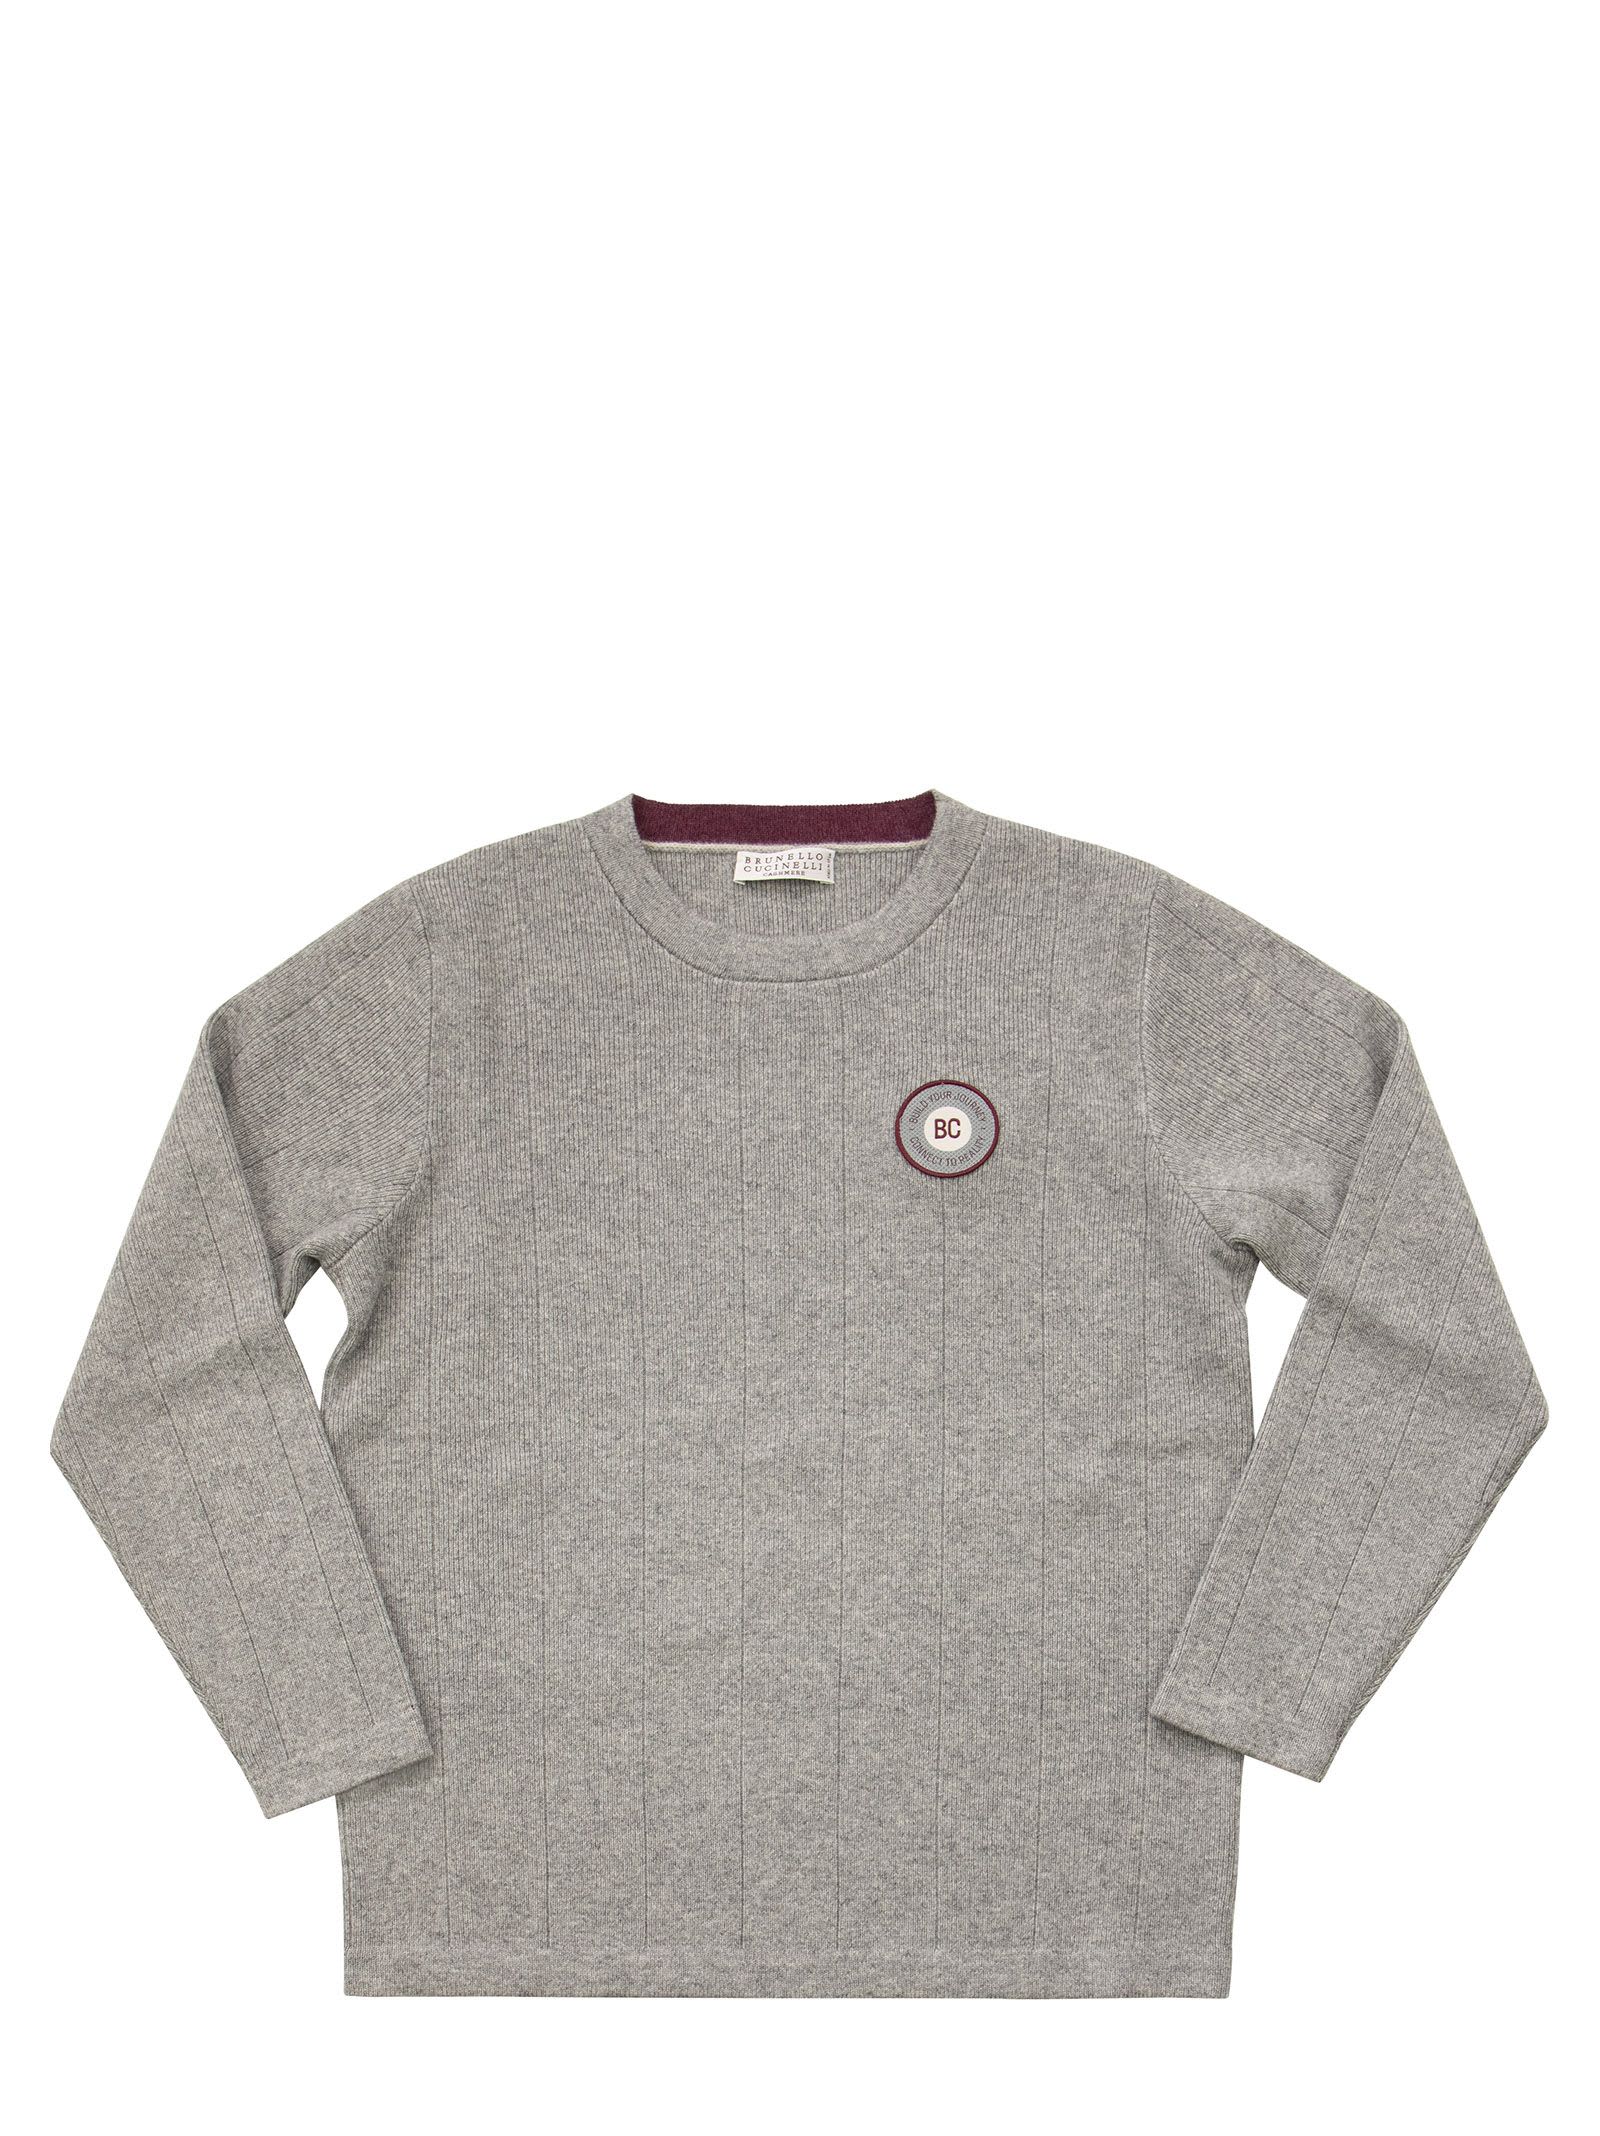 Brunello Cucinelli Wool And Cashmere Sweater With Badge